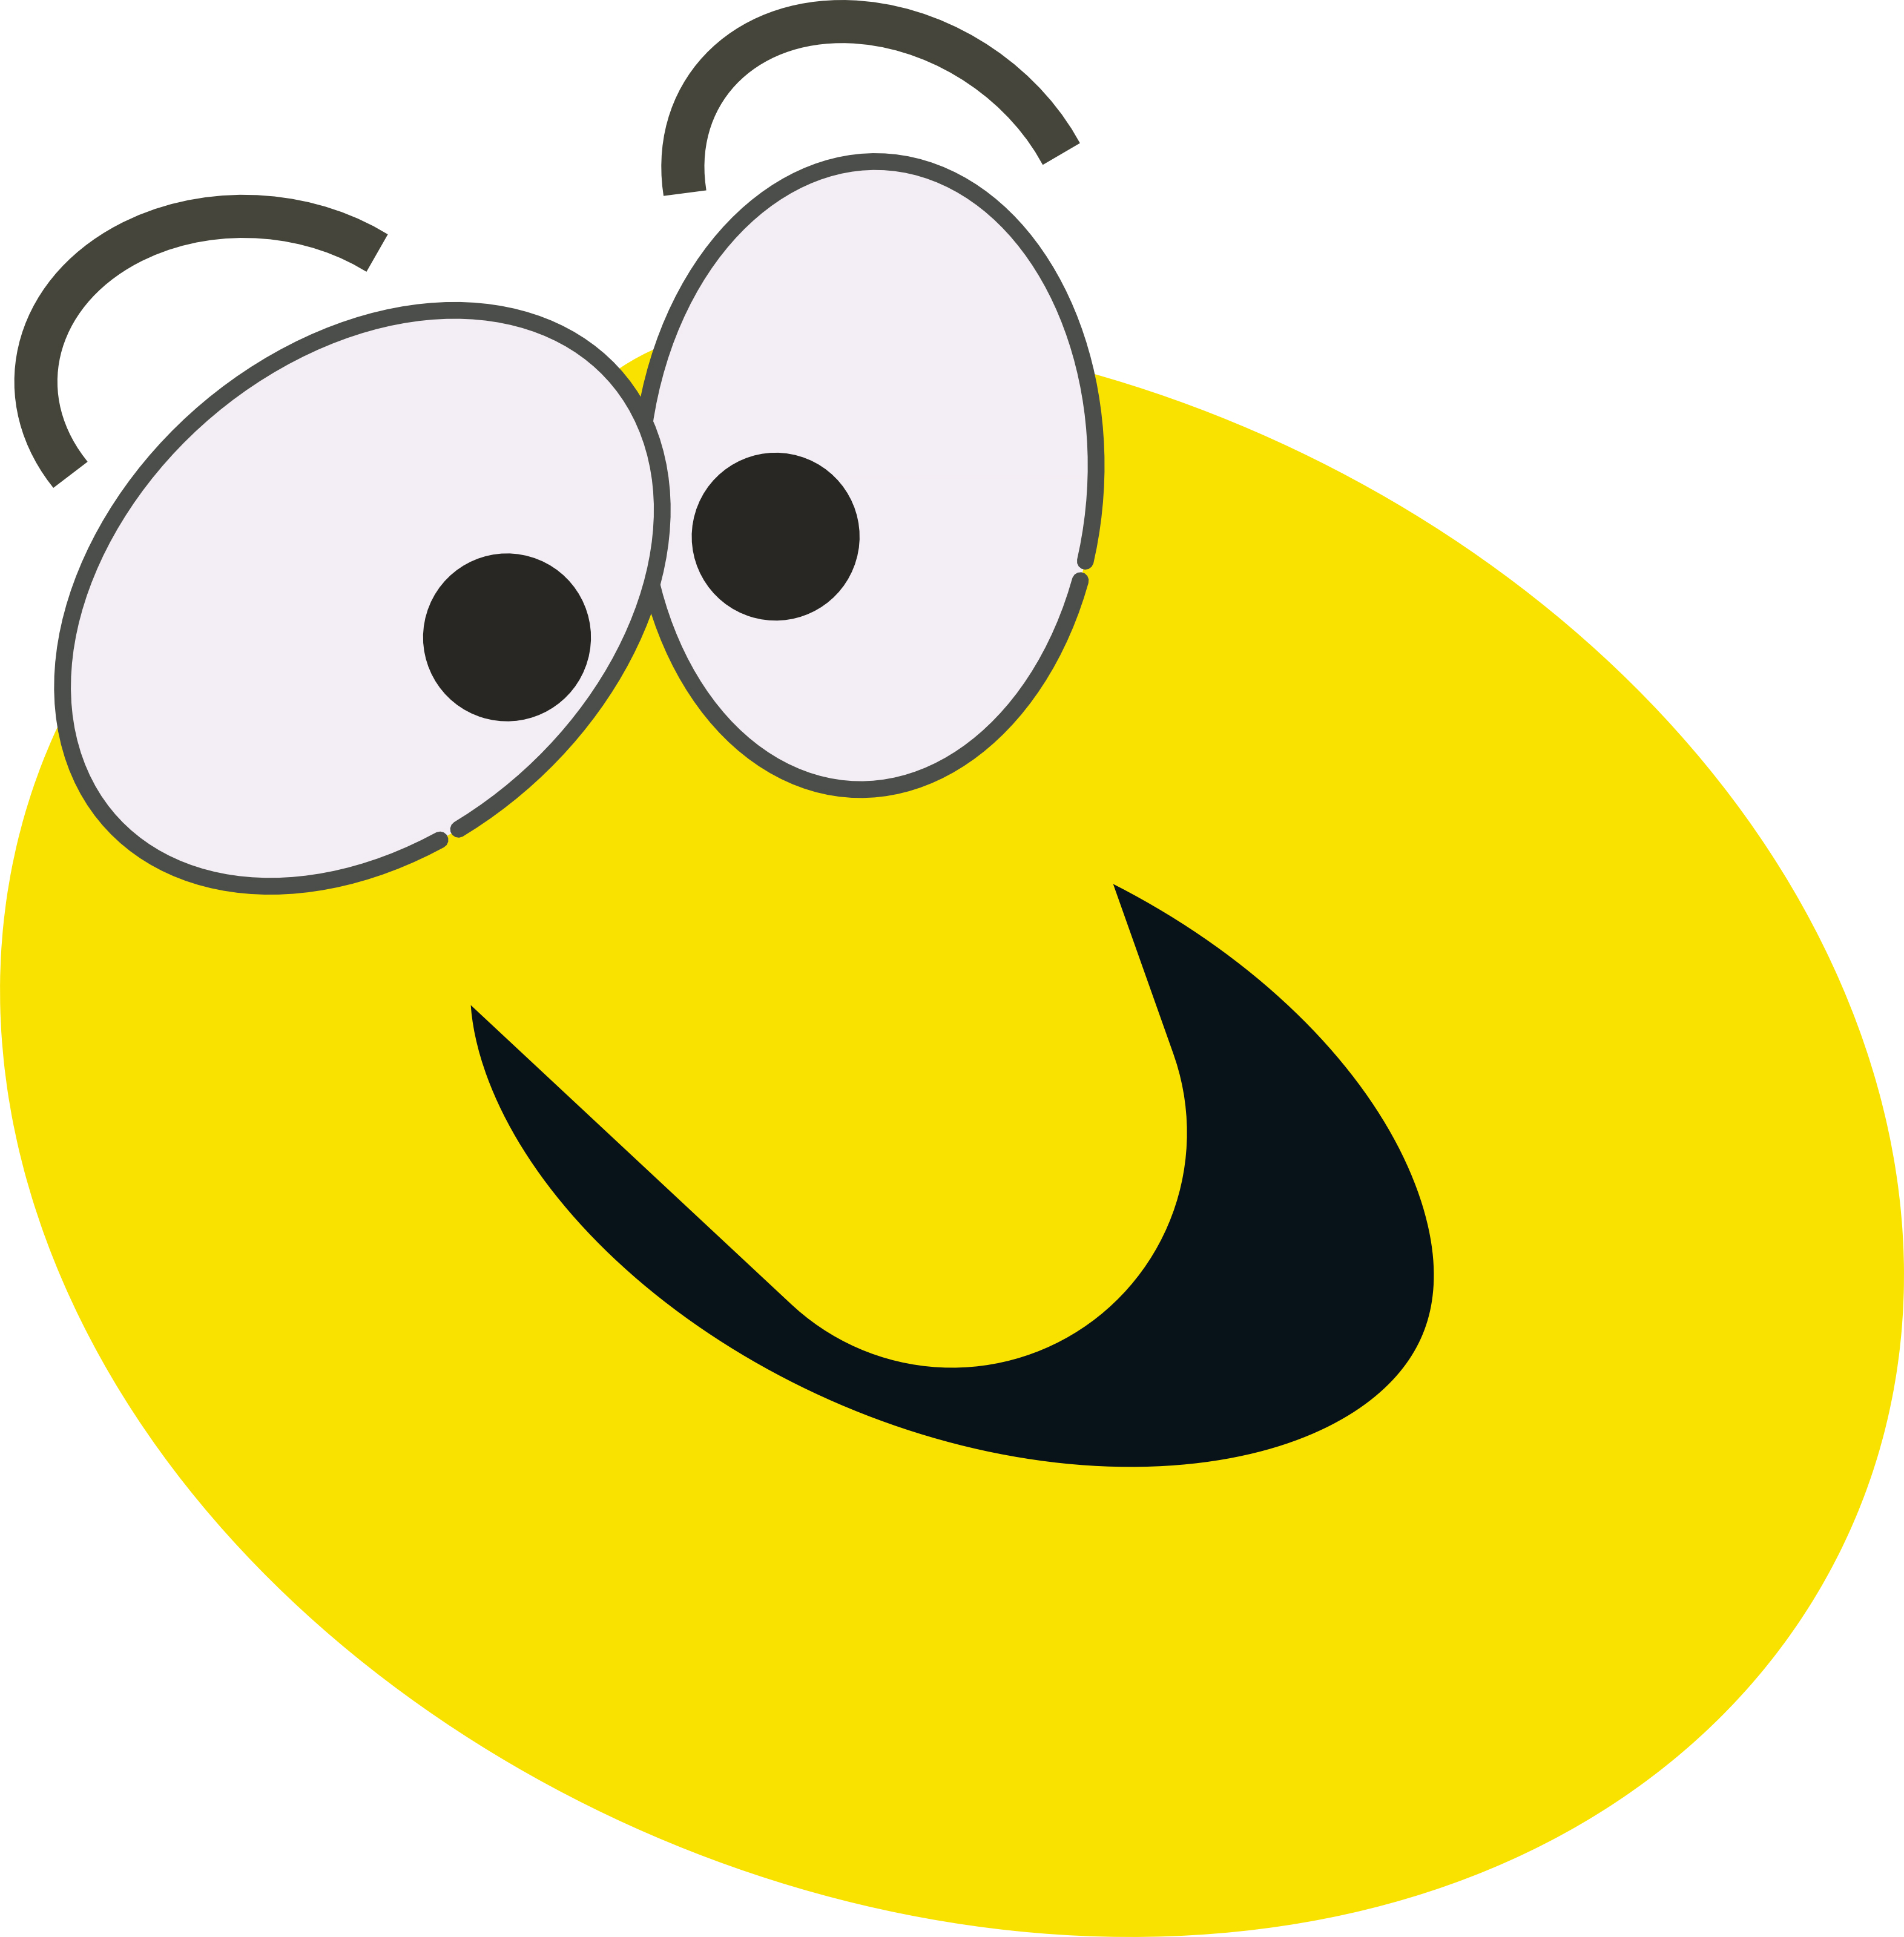 Related Pictures Smileyface Sick Smiley Faces Clip Art 15 ...